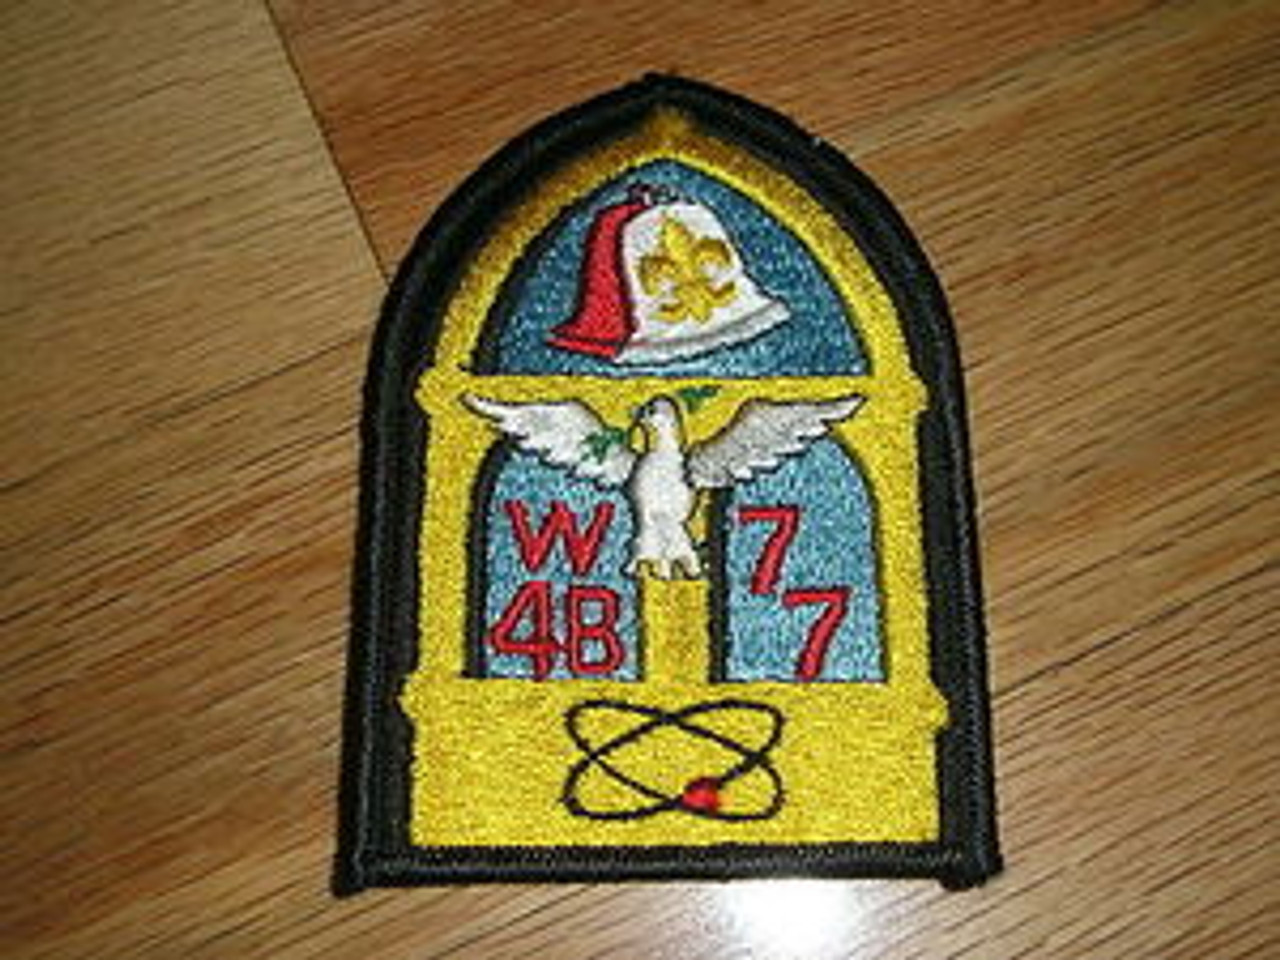 Section W4B 1977 O.A.Conference Patch - Scout